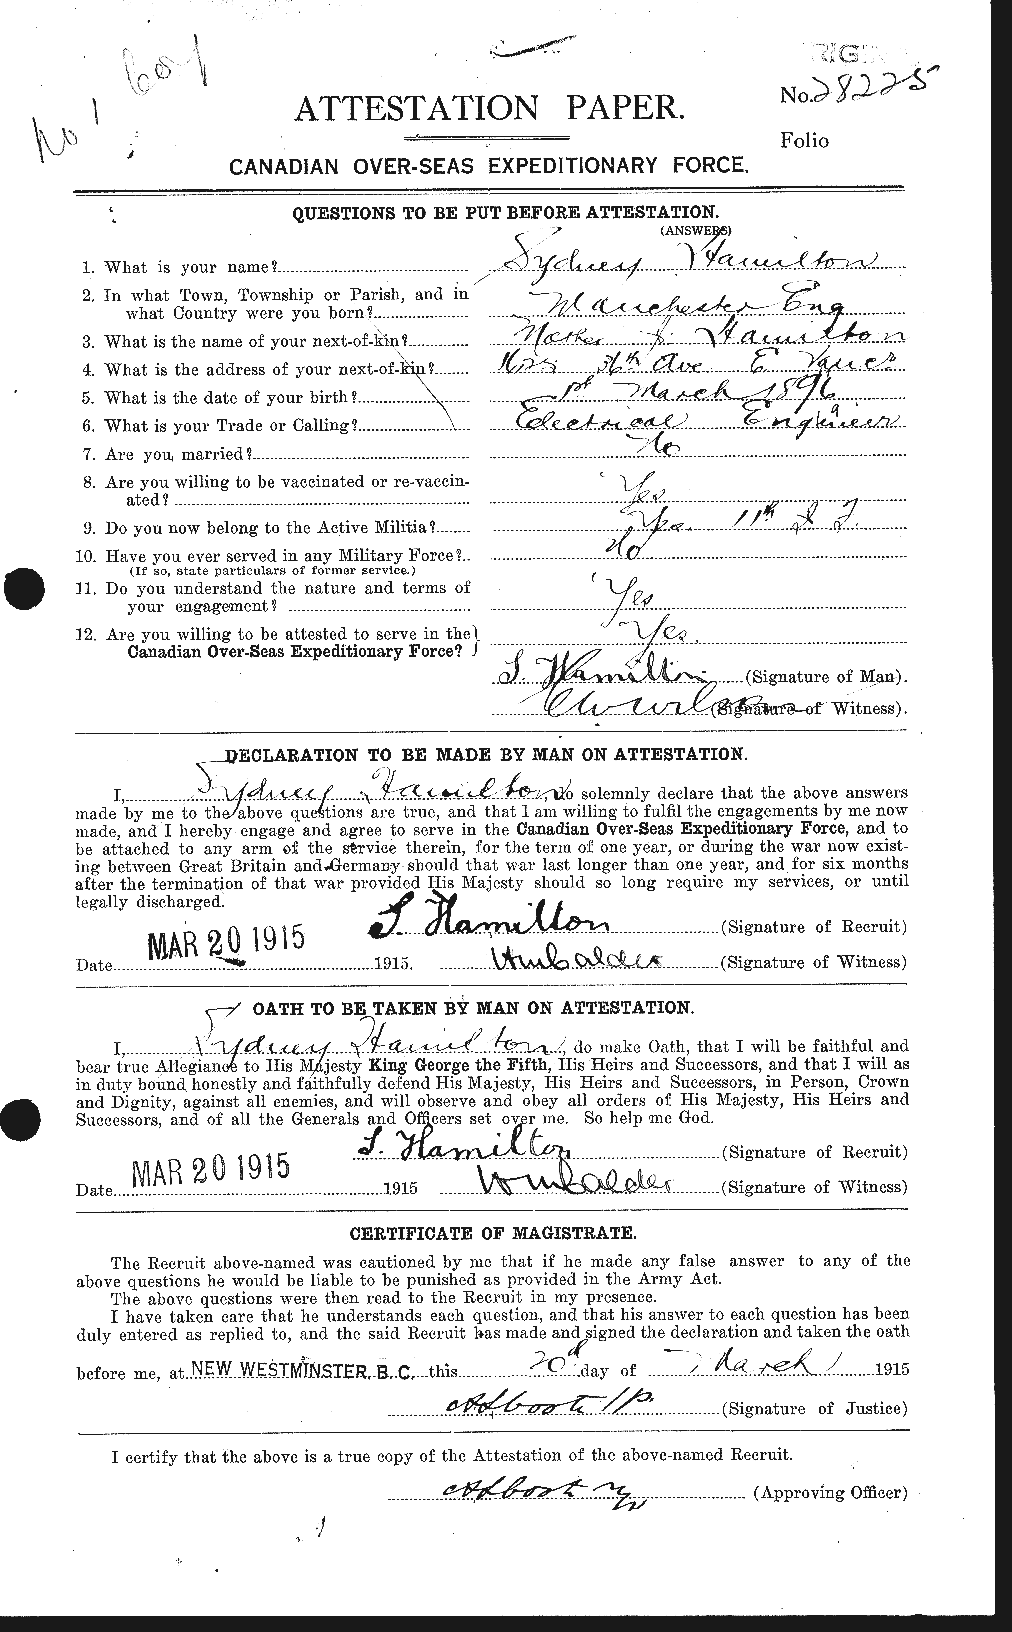 Personnel Records of the First World War - CEF 373327a